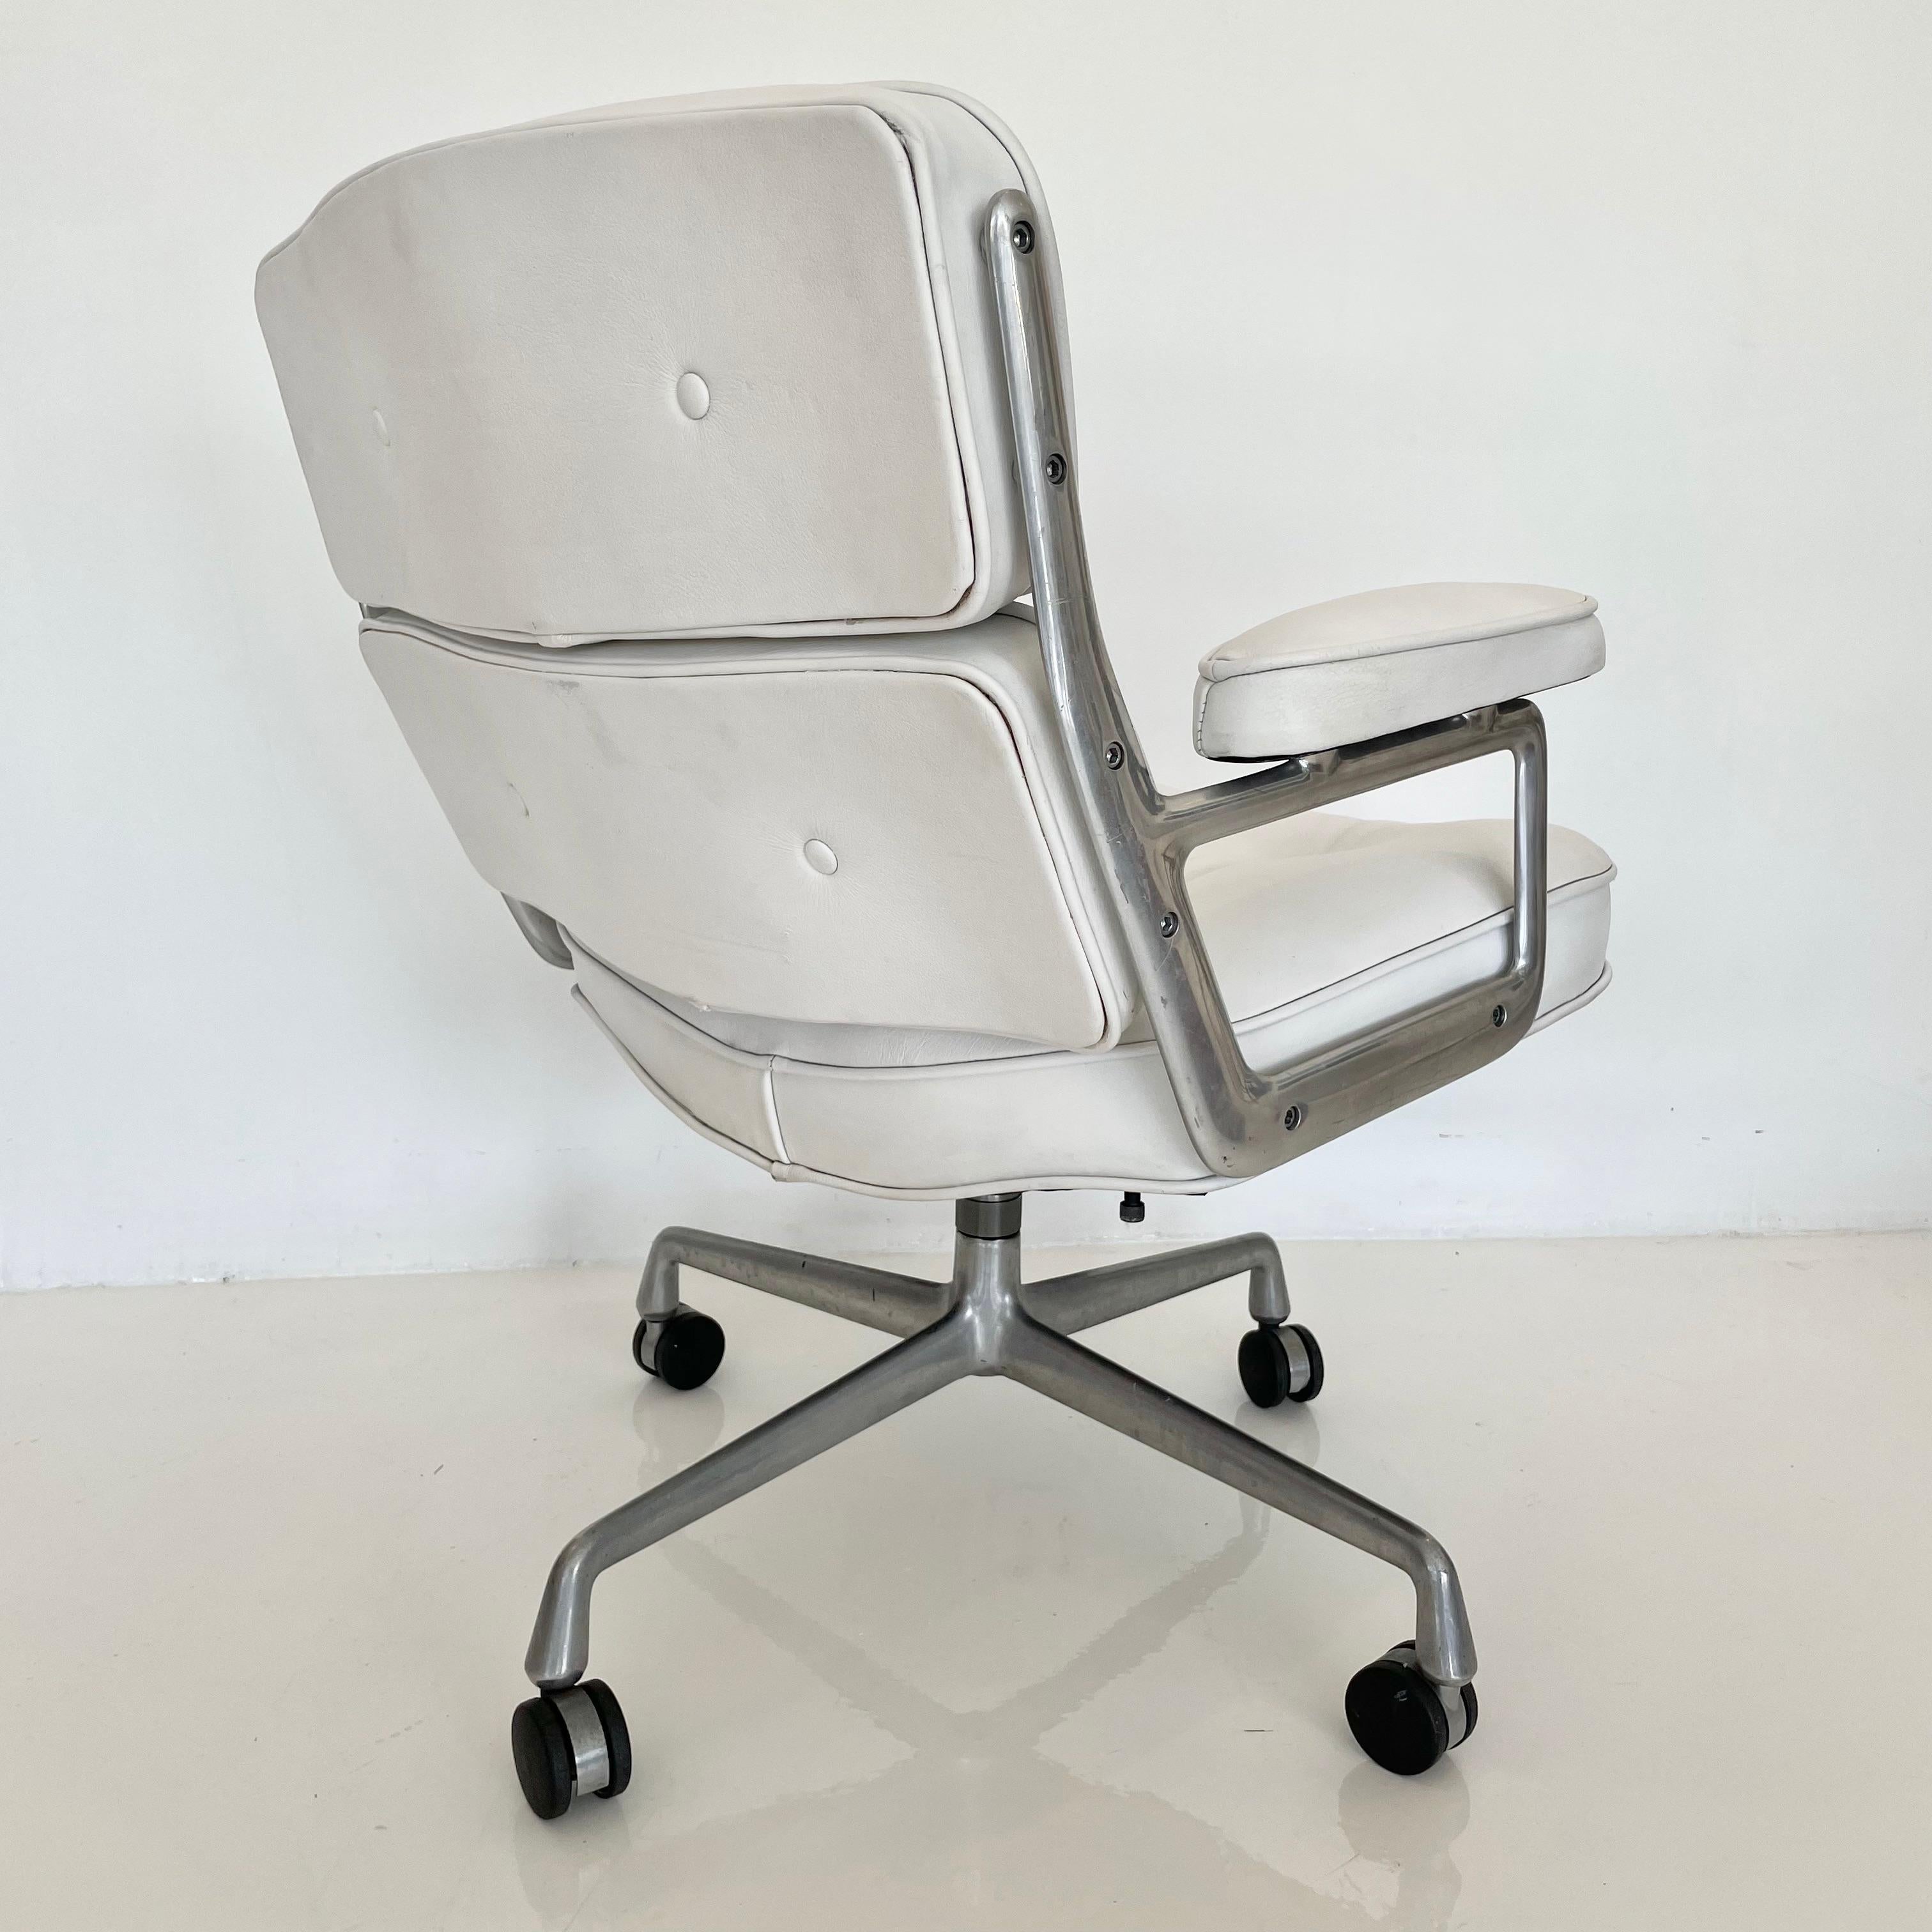 Original Eames Time Life Chair in White Leather 1